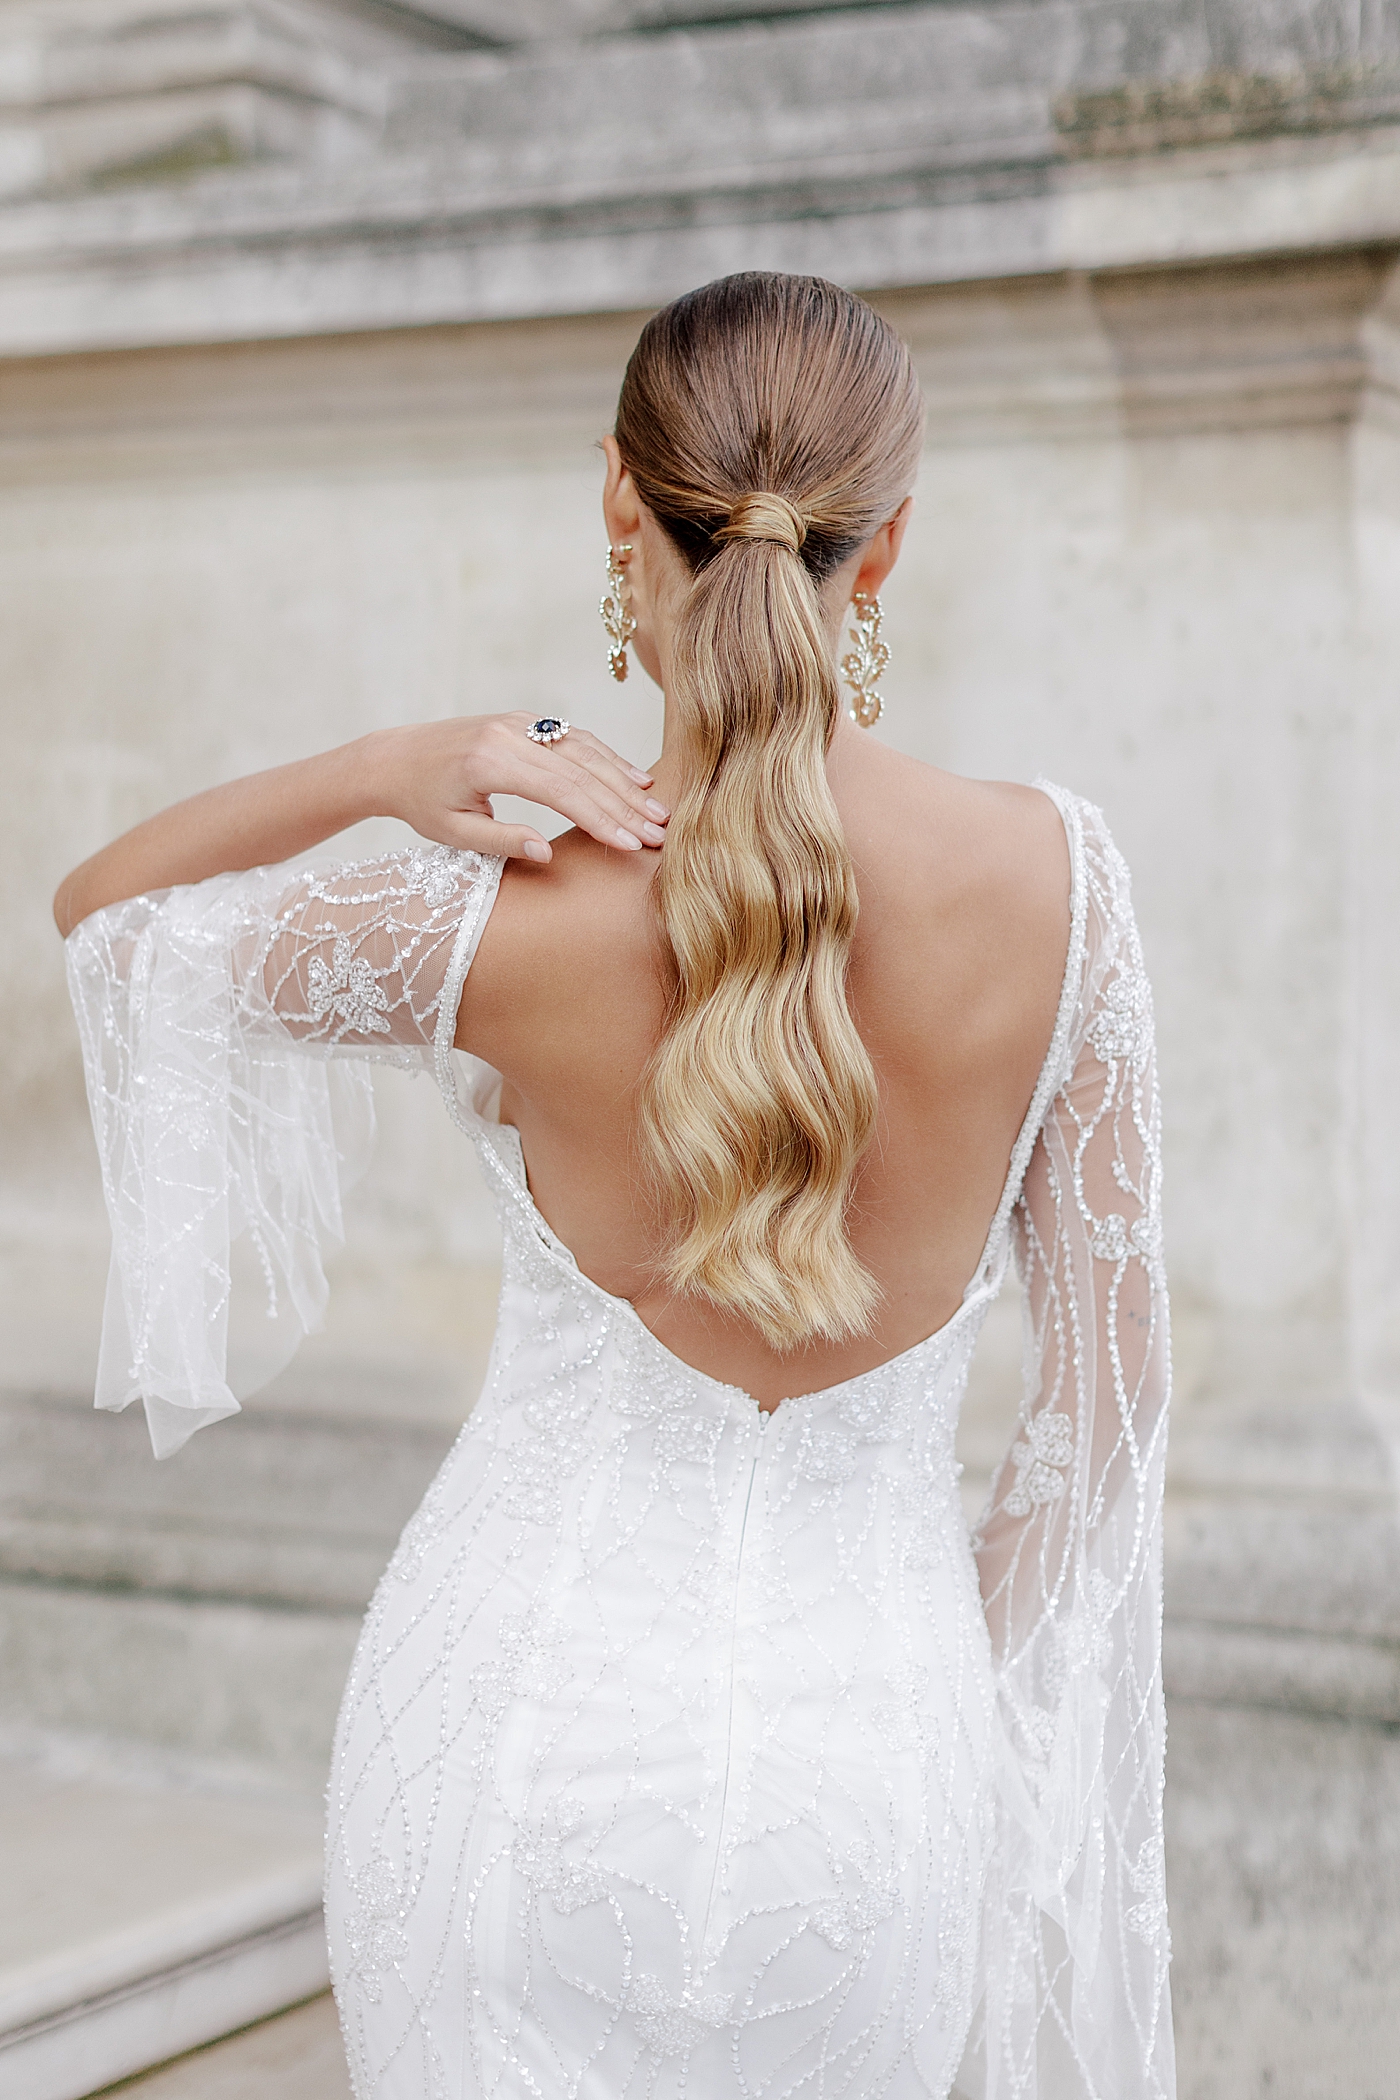 Back of dress and hair details of a bride with a ponytail | Image by Hope Helmuth Photography